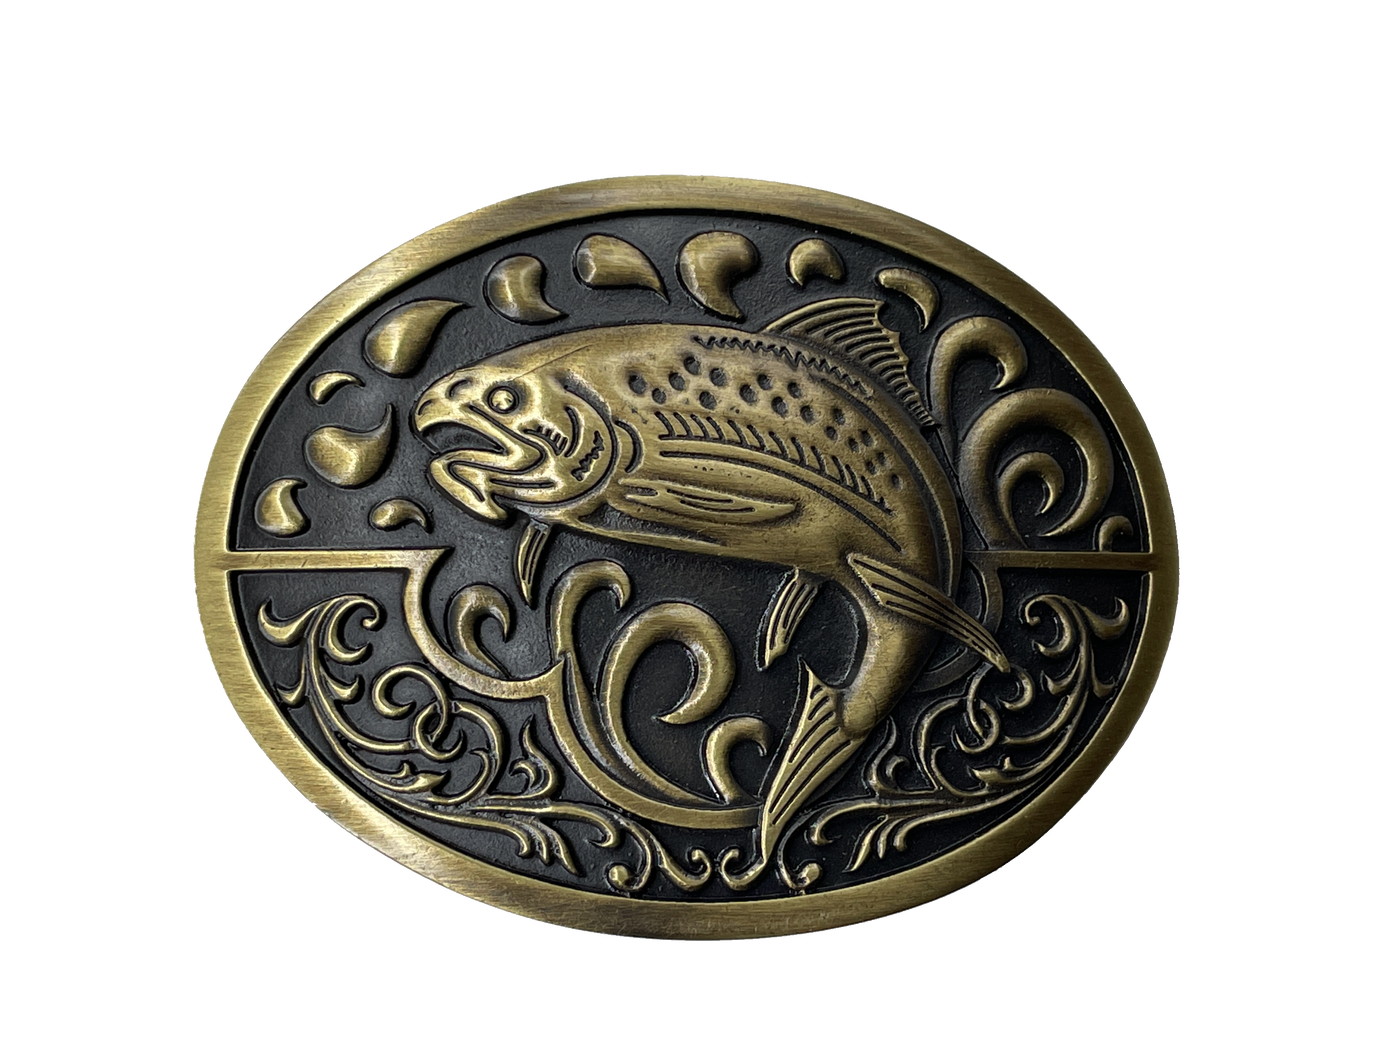 Fish buckle by AndWest Dimensions are 3" tall by 3 3/4" wide Fits belts up to 1 1/2" wide Buckle is brass colored with Fish scene. Back of buckle is black. Available online and in the retail shop just outside Nashville in Smyrna, TN. Made in Mexico